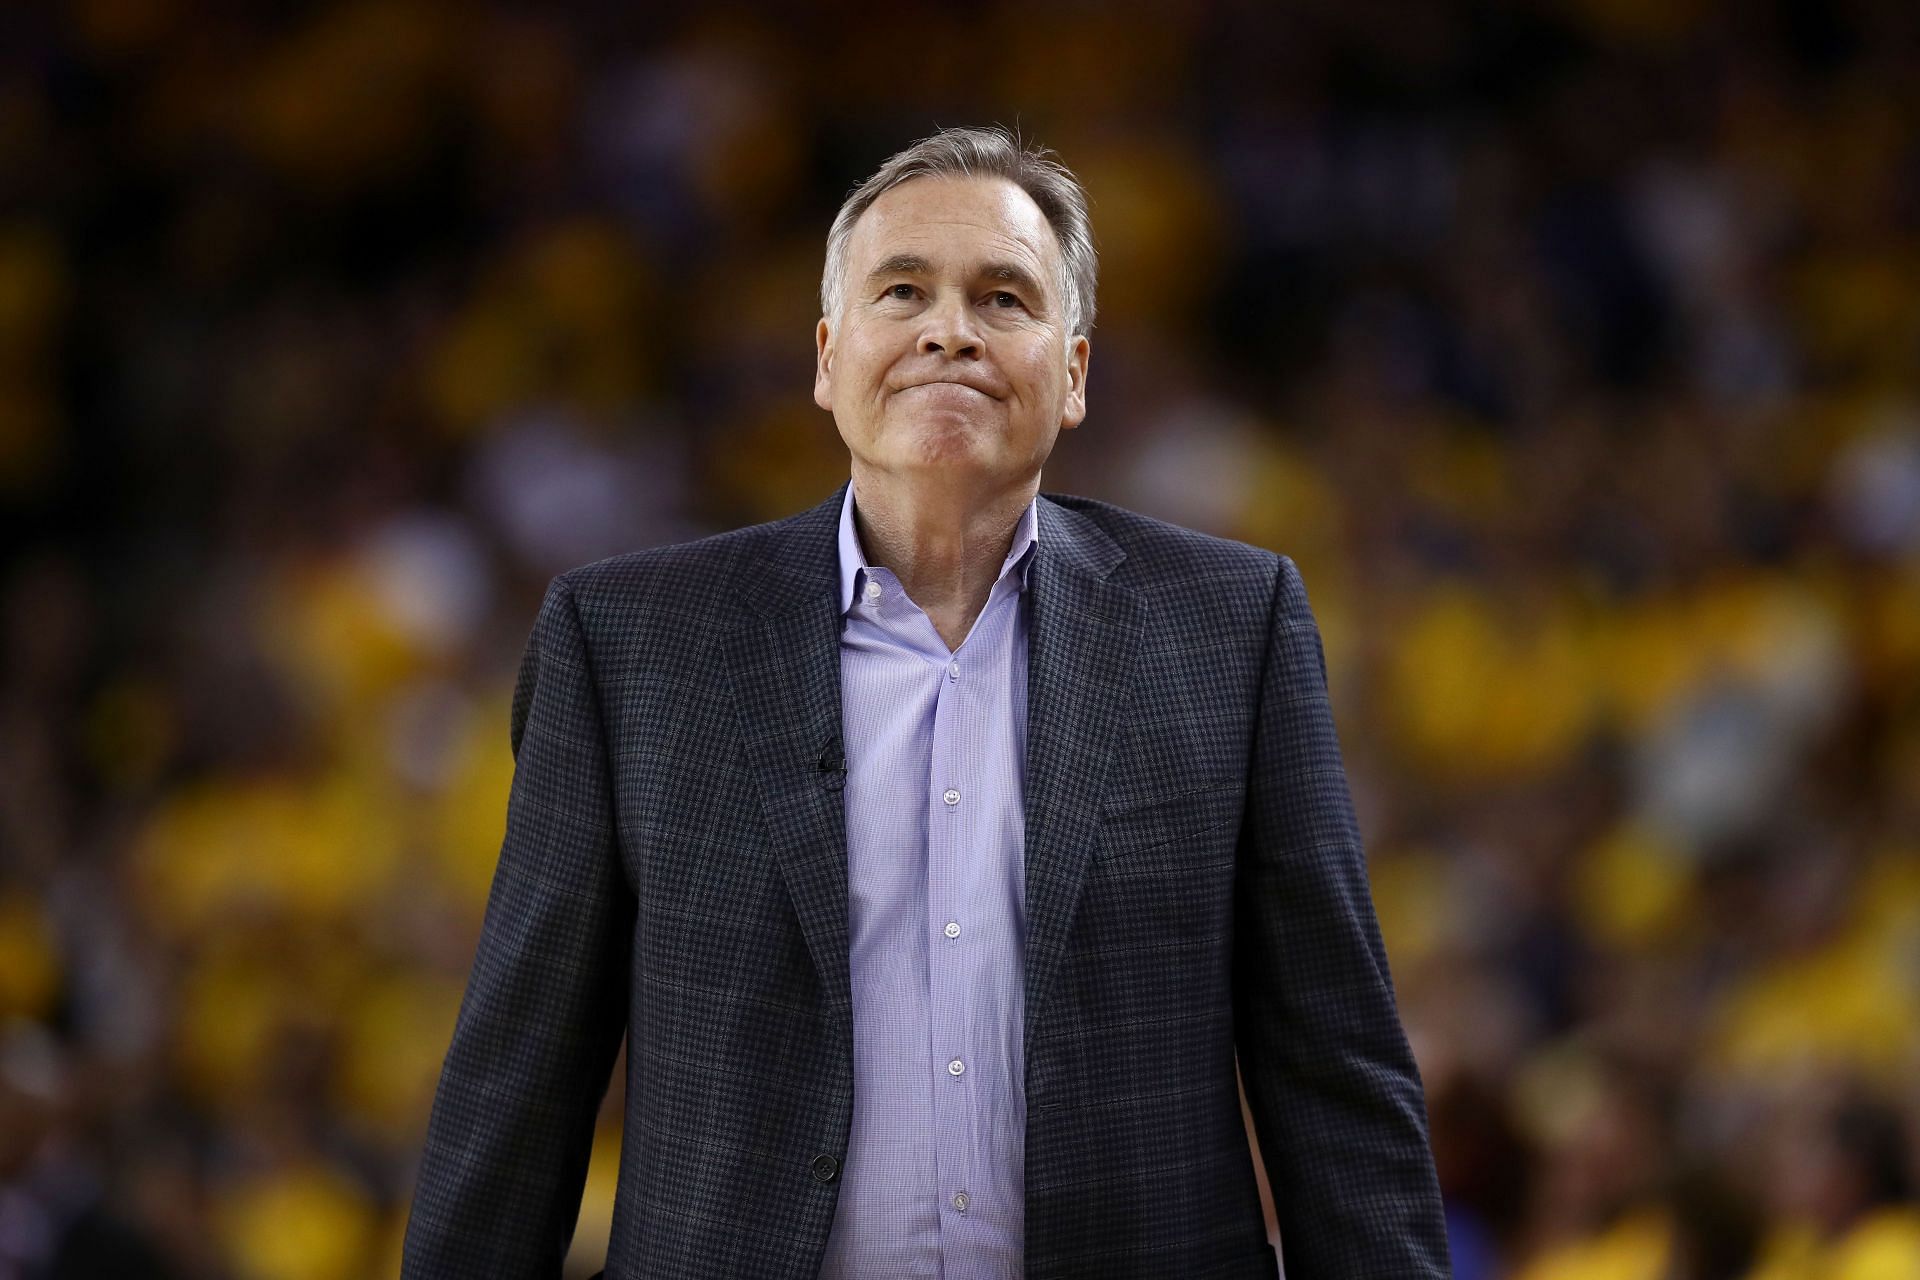 NBA analyst on Mike D&rsquo;Antoni&rsquo;s meeting with Michael Jordan